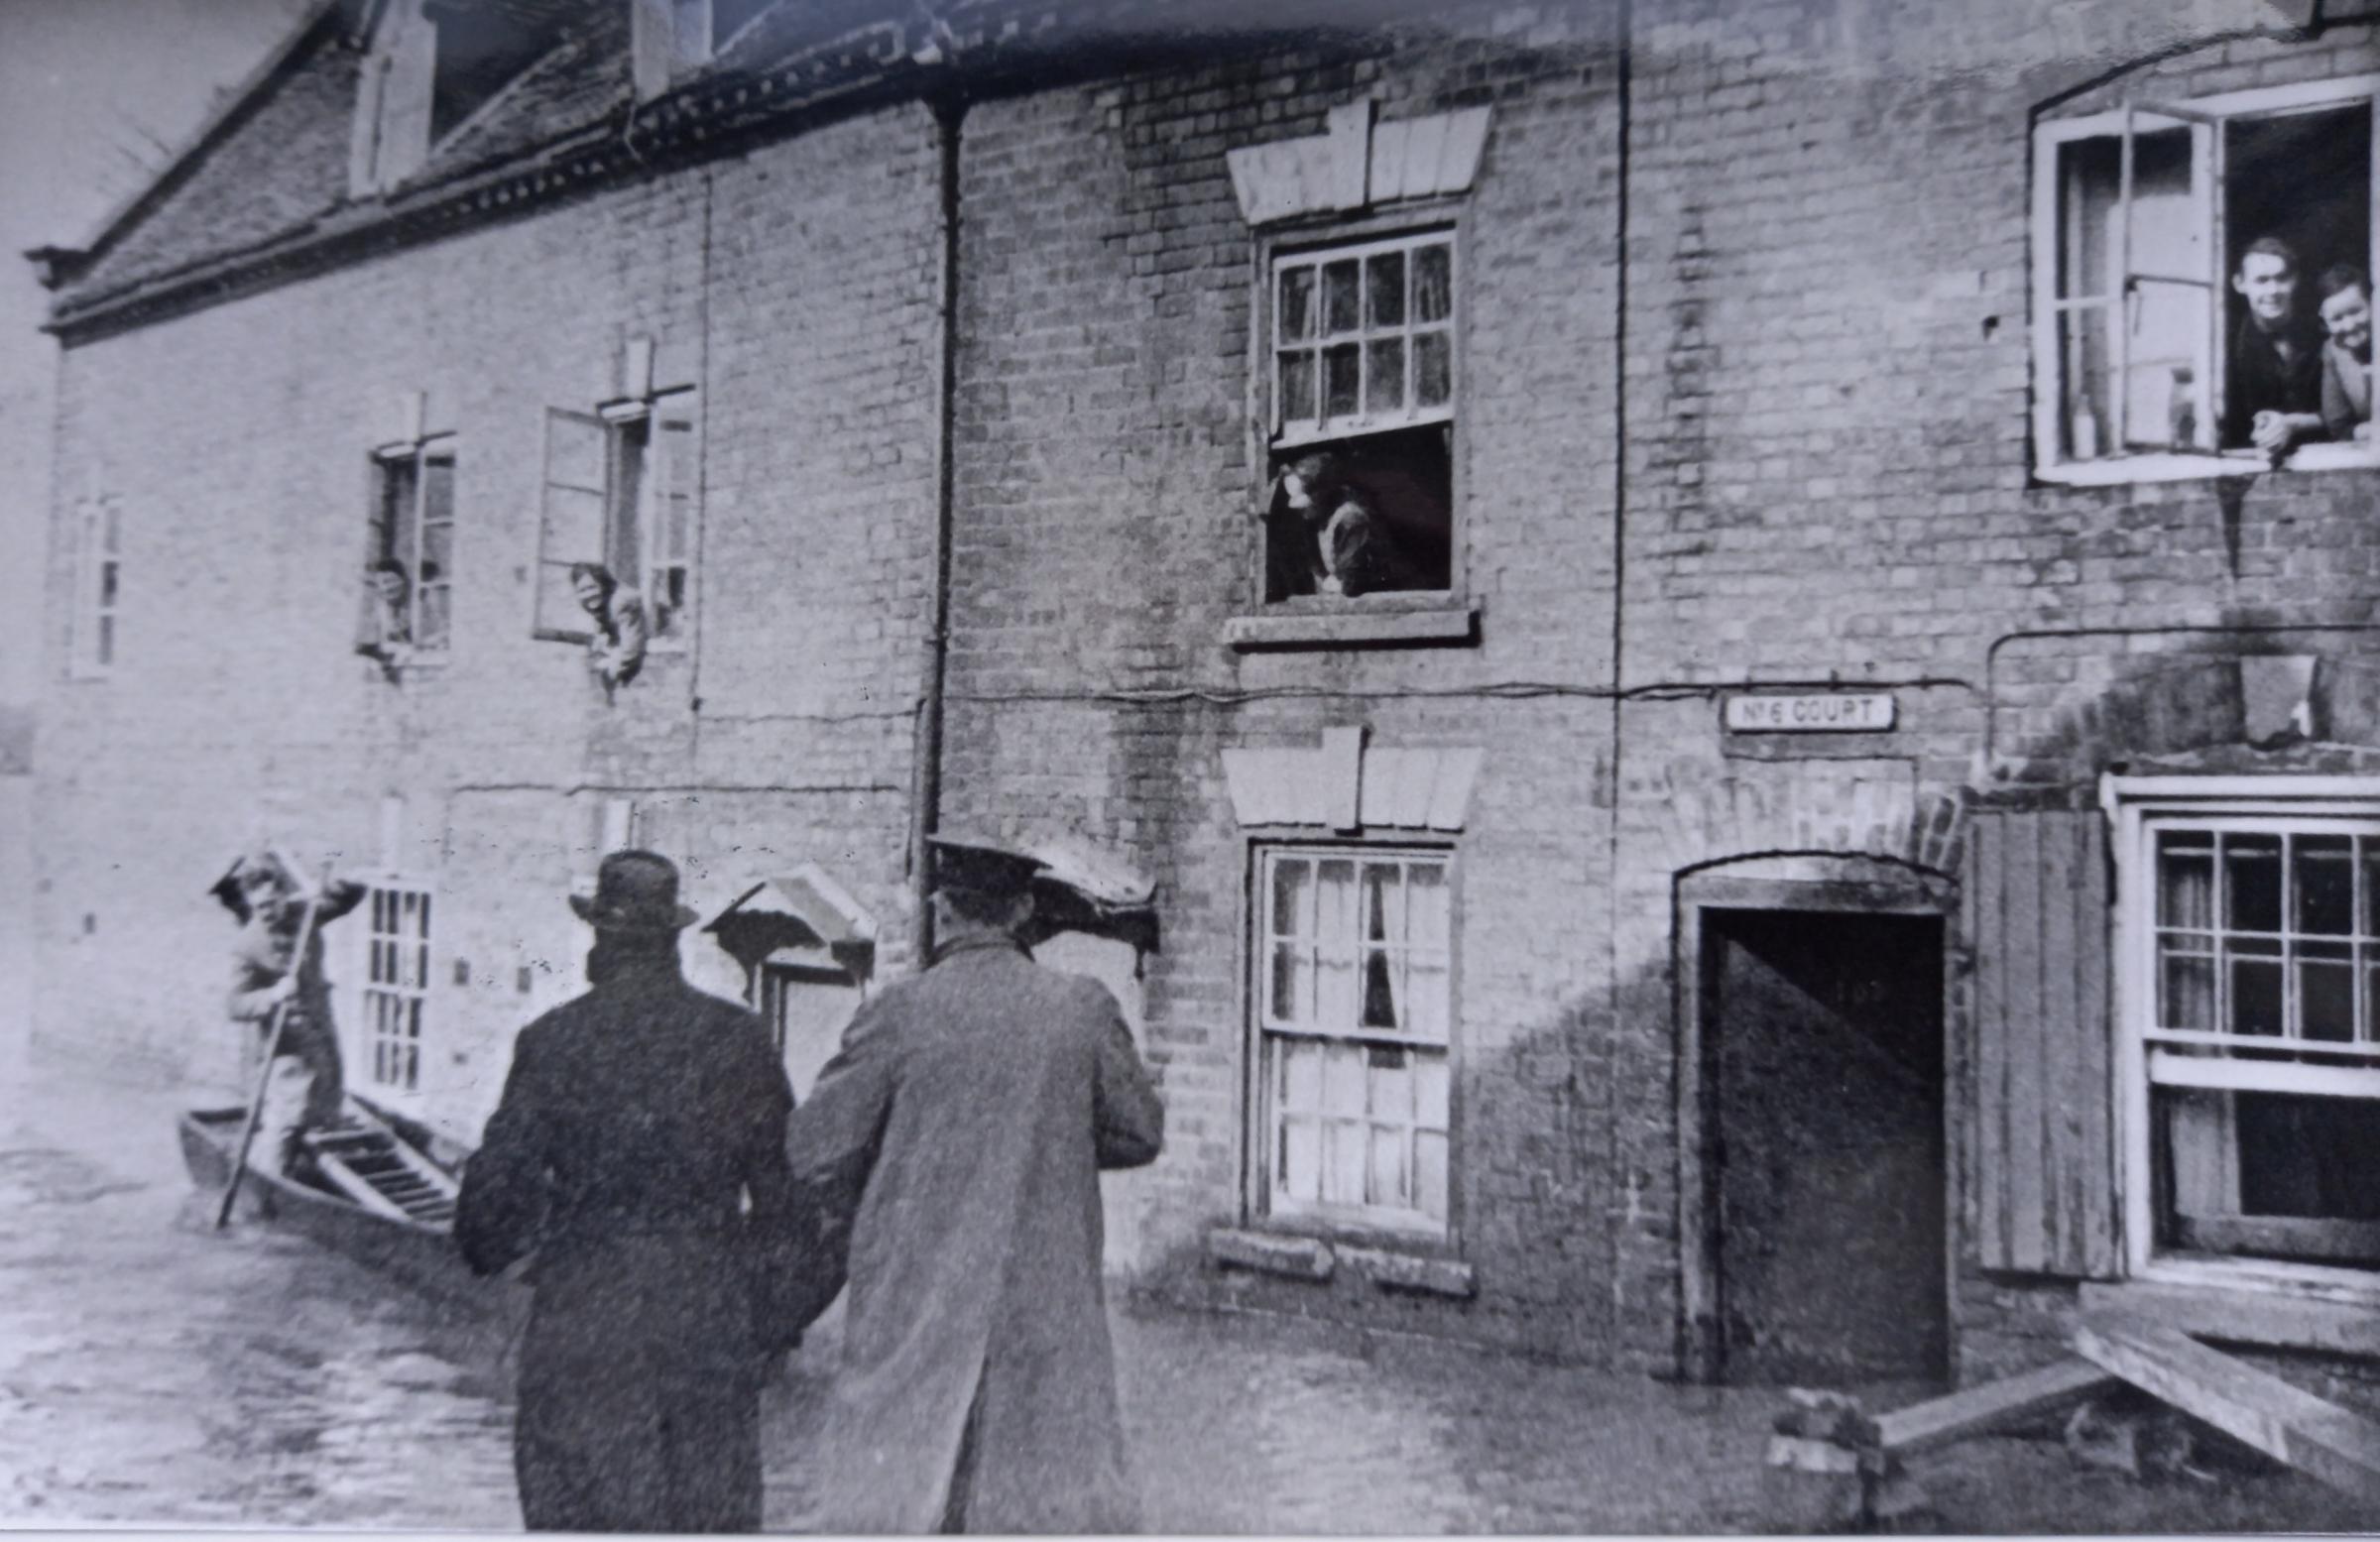 Occupants of Number 6 Court, Severn Street during the 1947 floods. It is likely “Lampern Joe” Jenkins family would have occupied similar accommodation